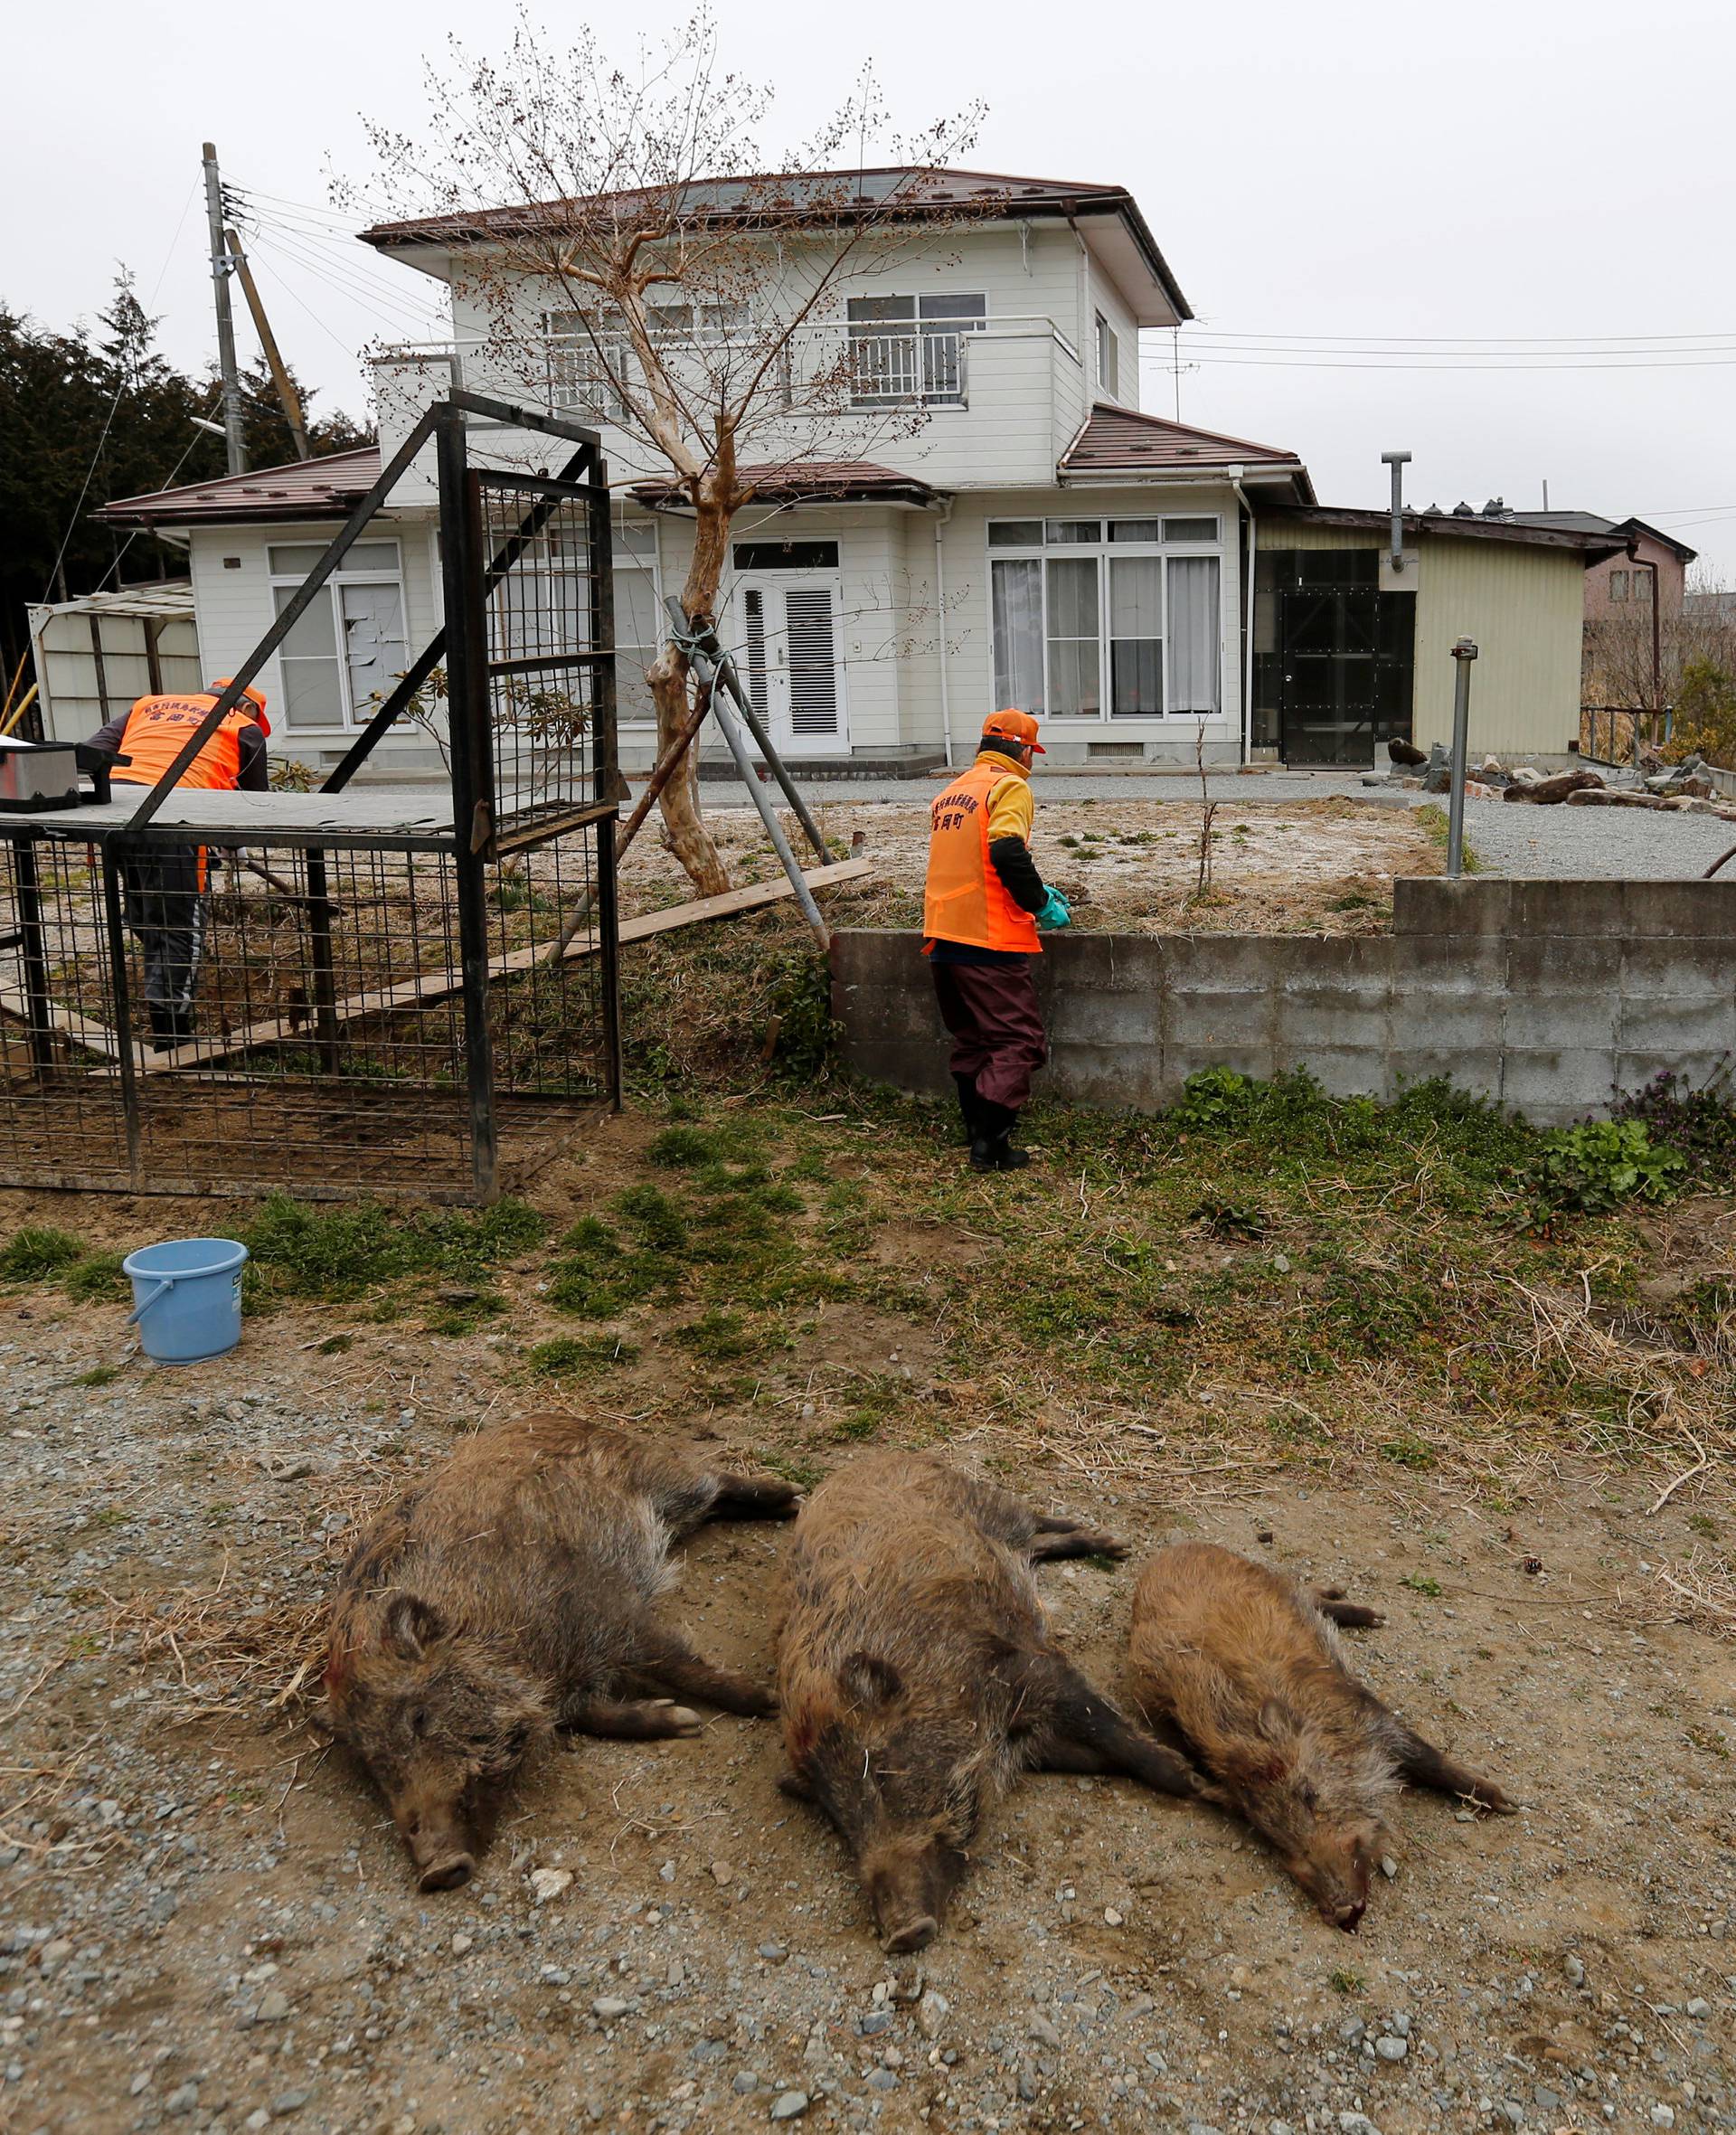 Wild boars which killed by a pellet gun in a booby trap, are seen at a residential area in an evacuation zone near TEPCO's tsunami-crippled Fukushima Daiichi nuclear power plant in Tomioka town